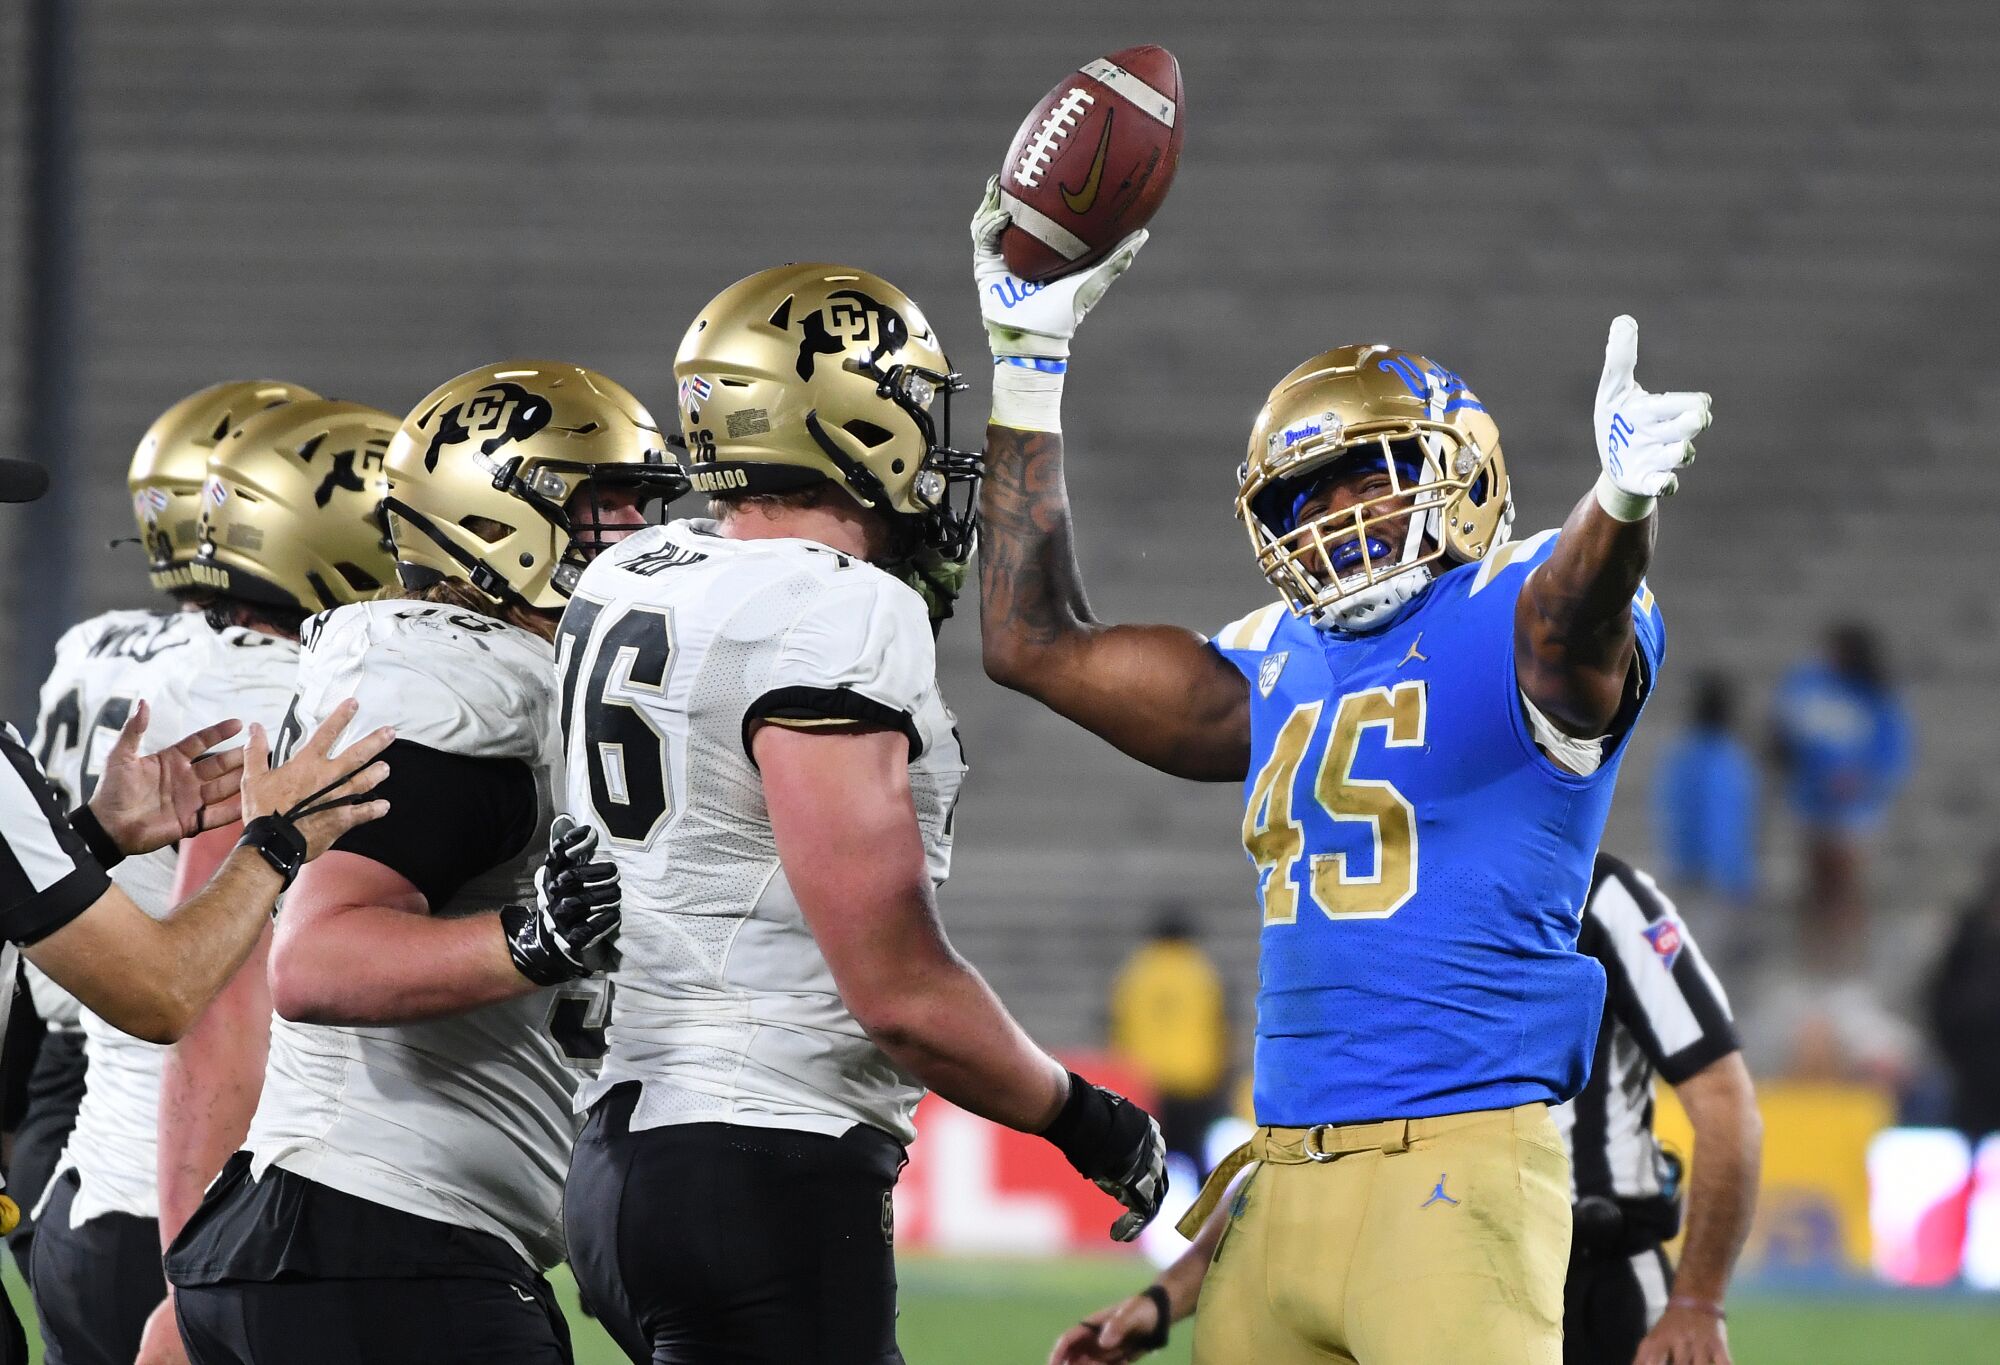 UCLA player celebrates after recovering fumble